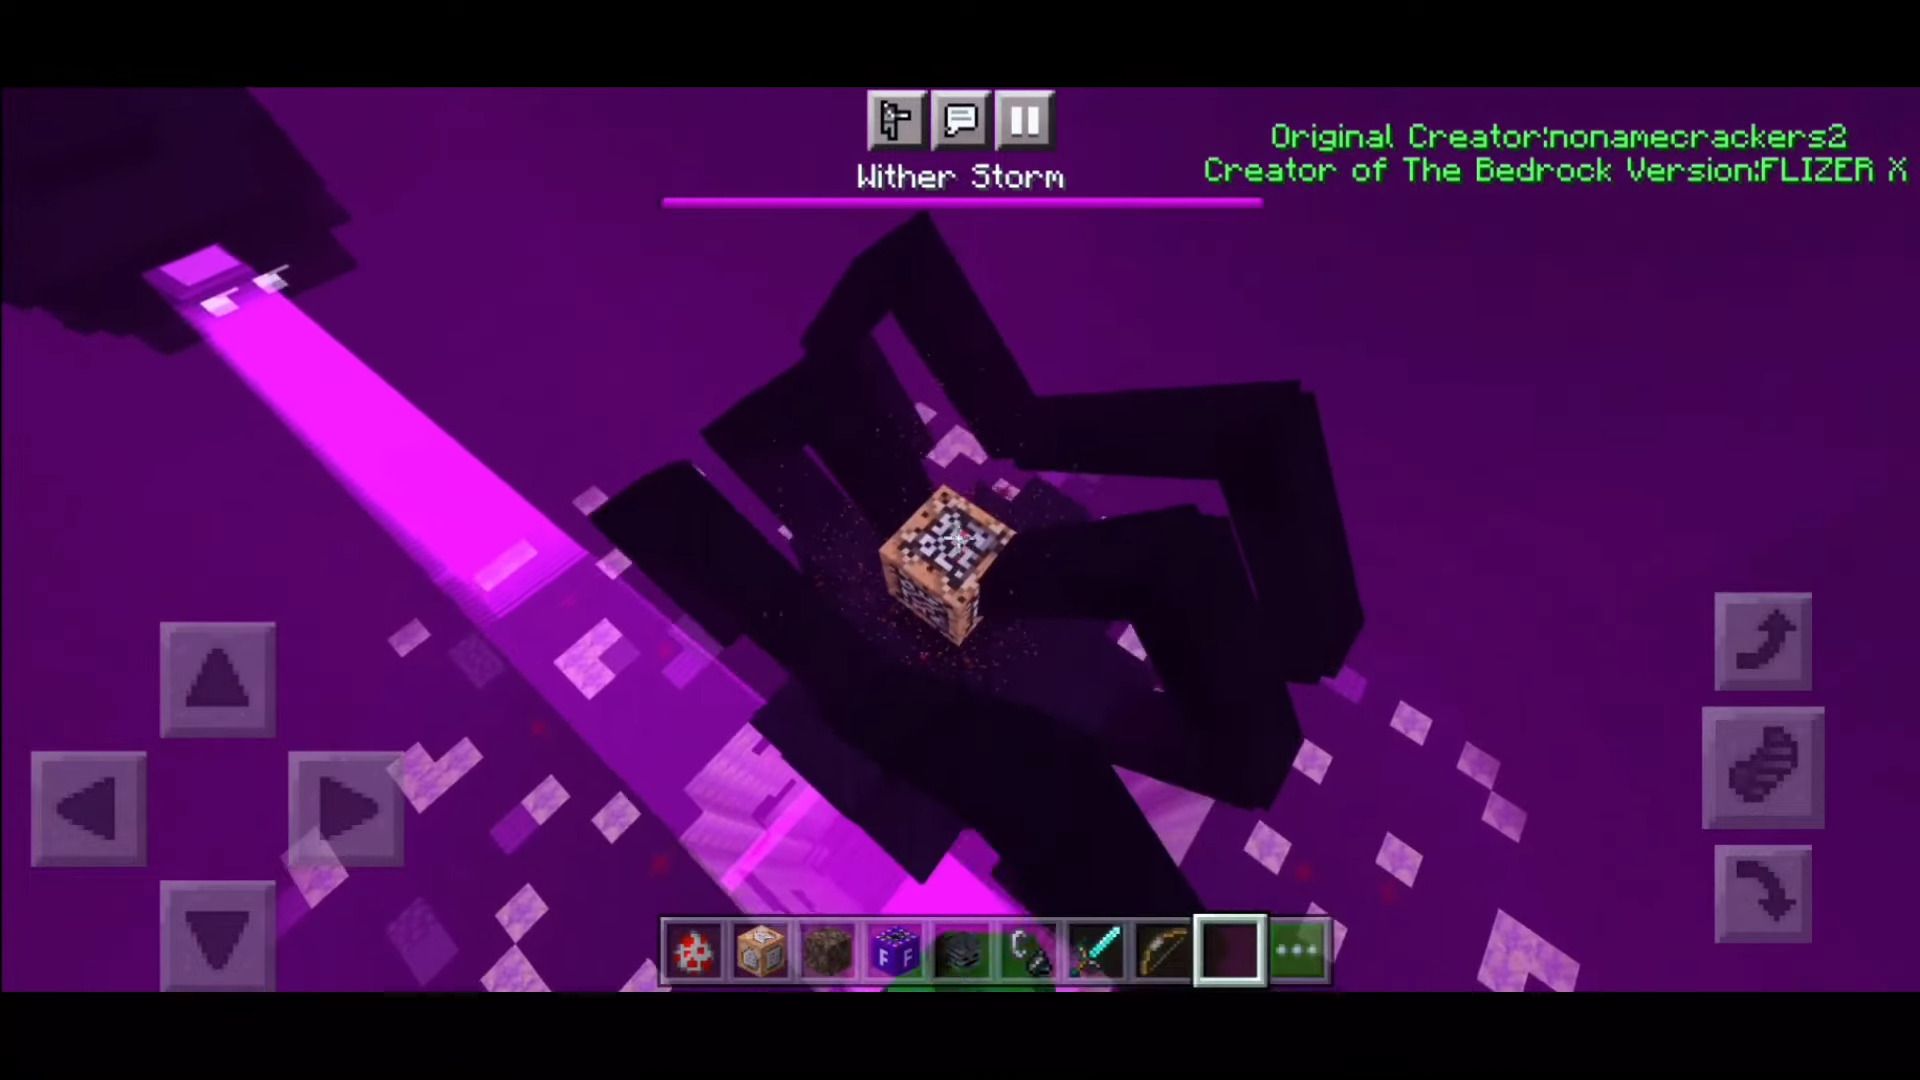 Cracker's Wither Storm Mod Update